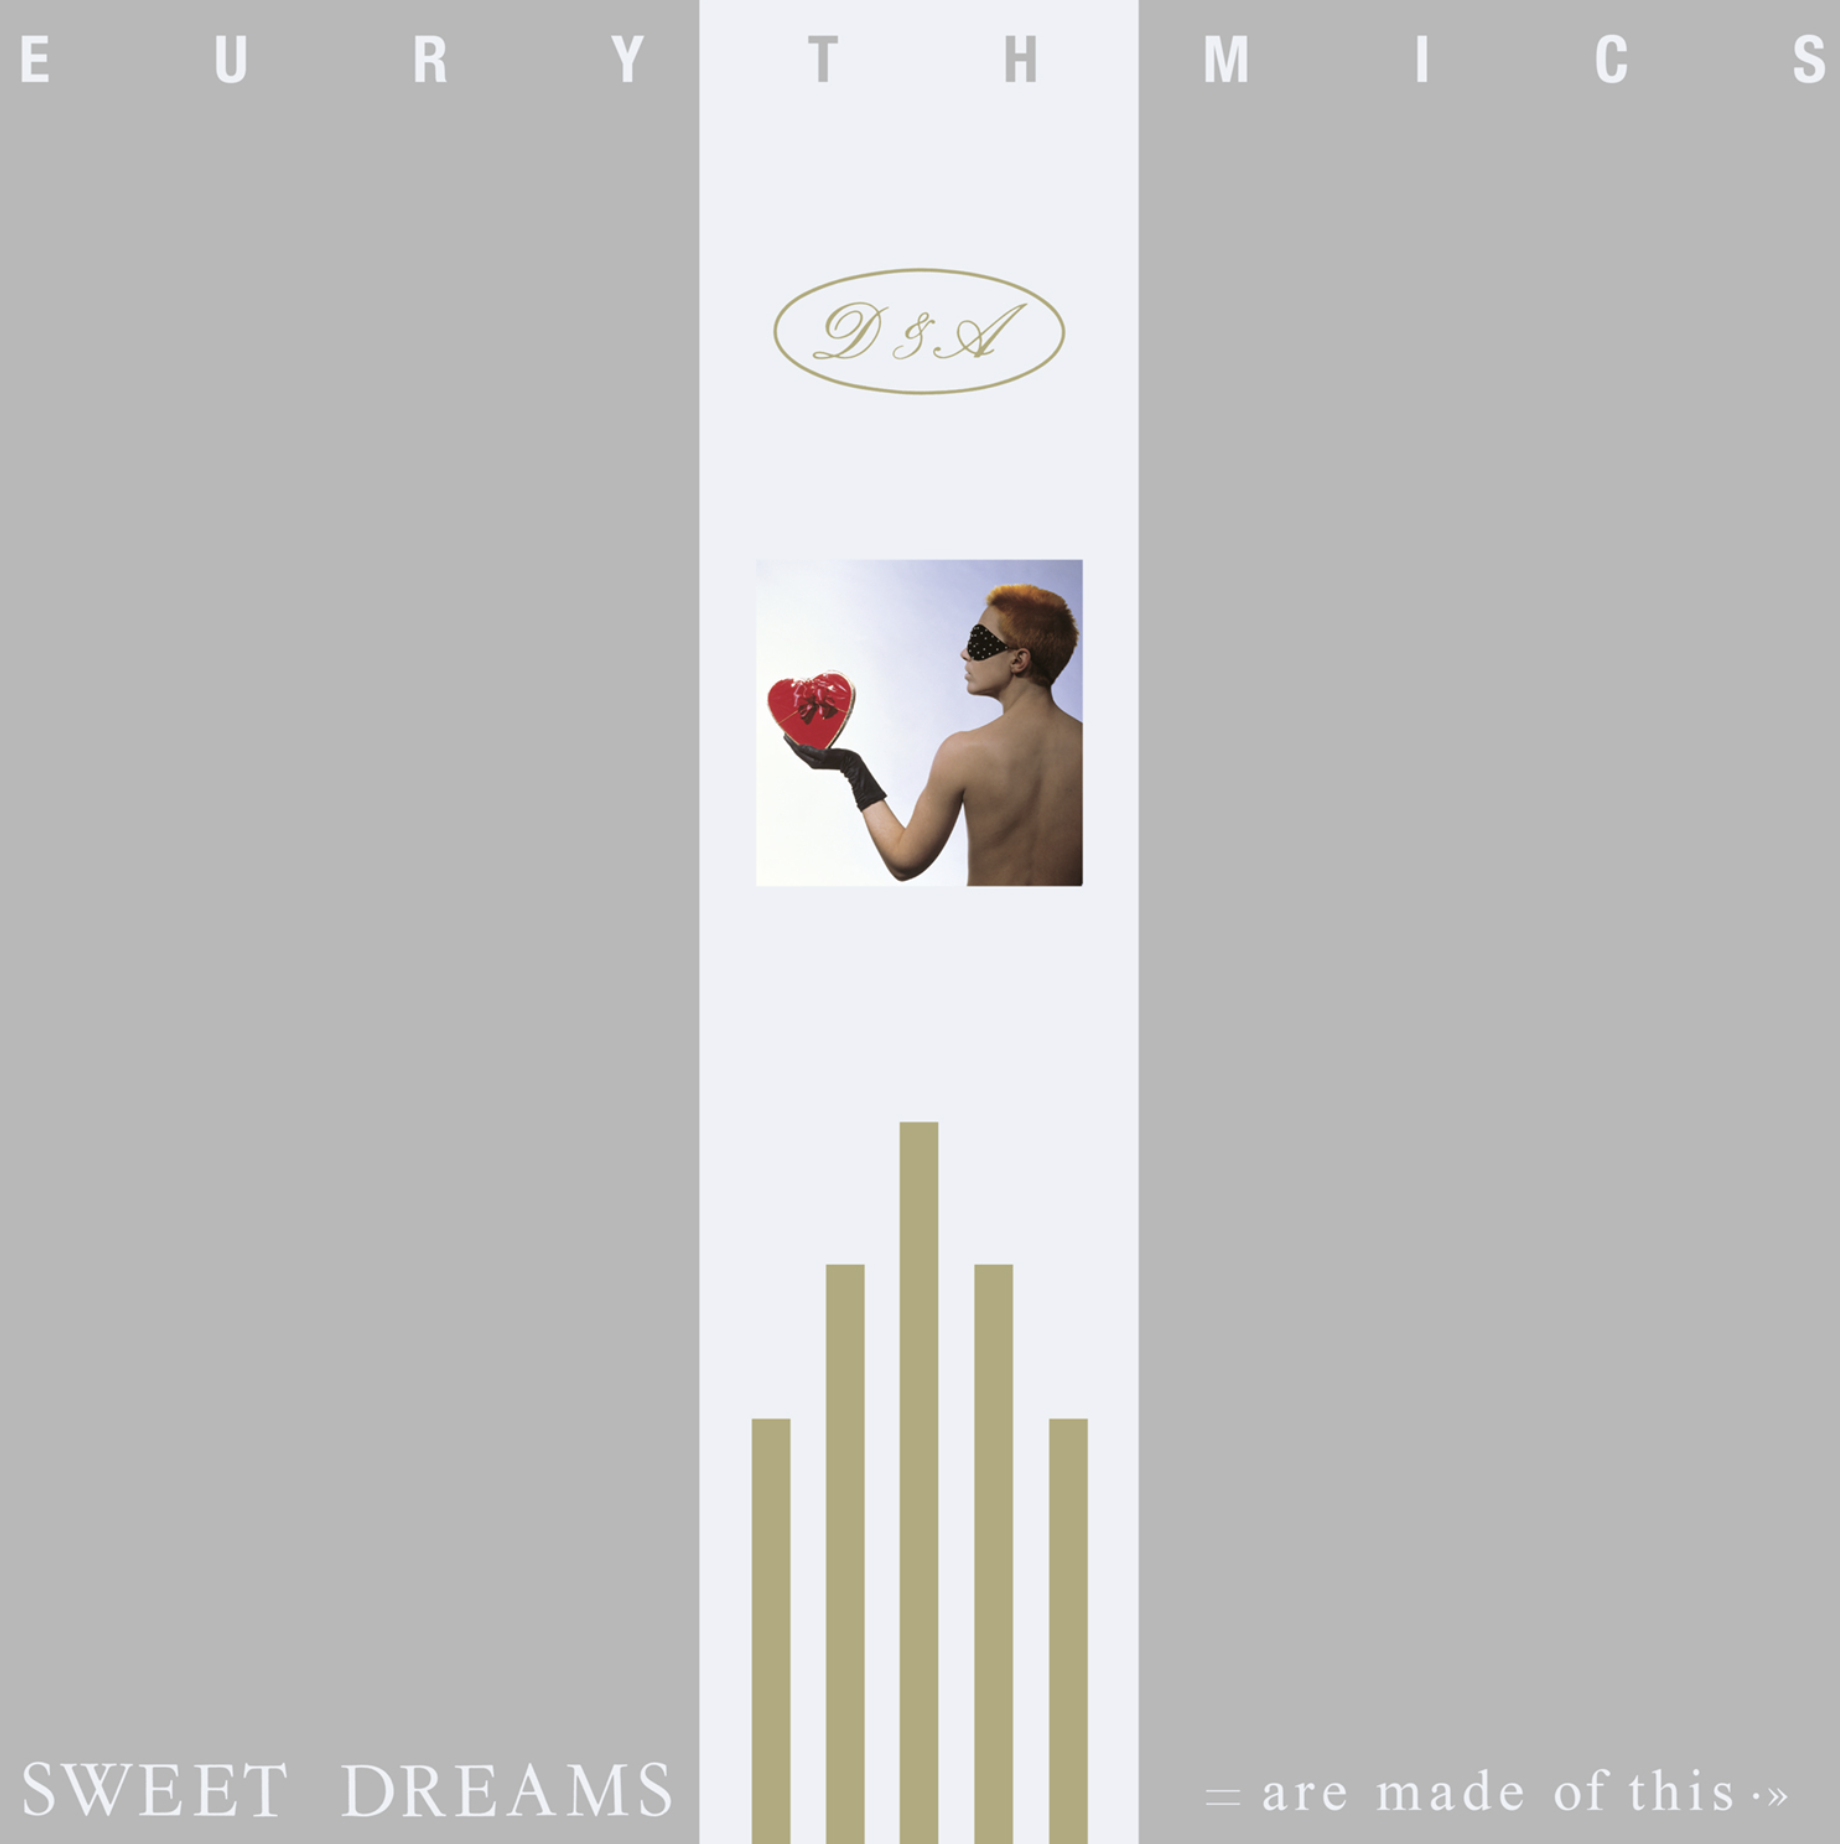 Eurythmics' "Sweet Dreams (Are Made of This)"